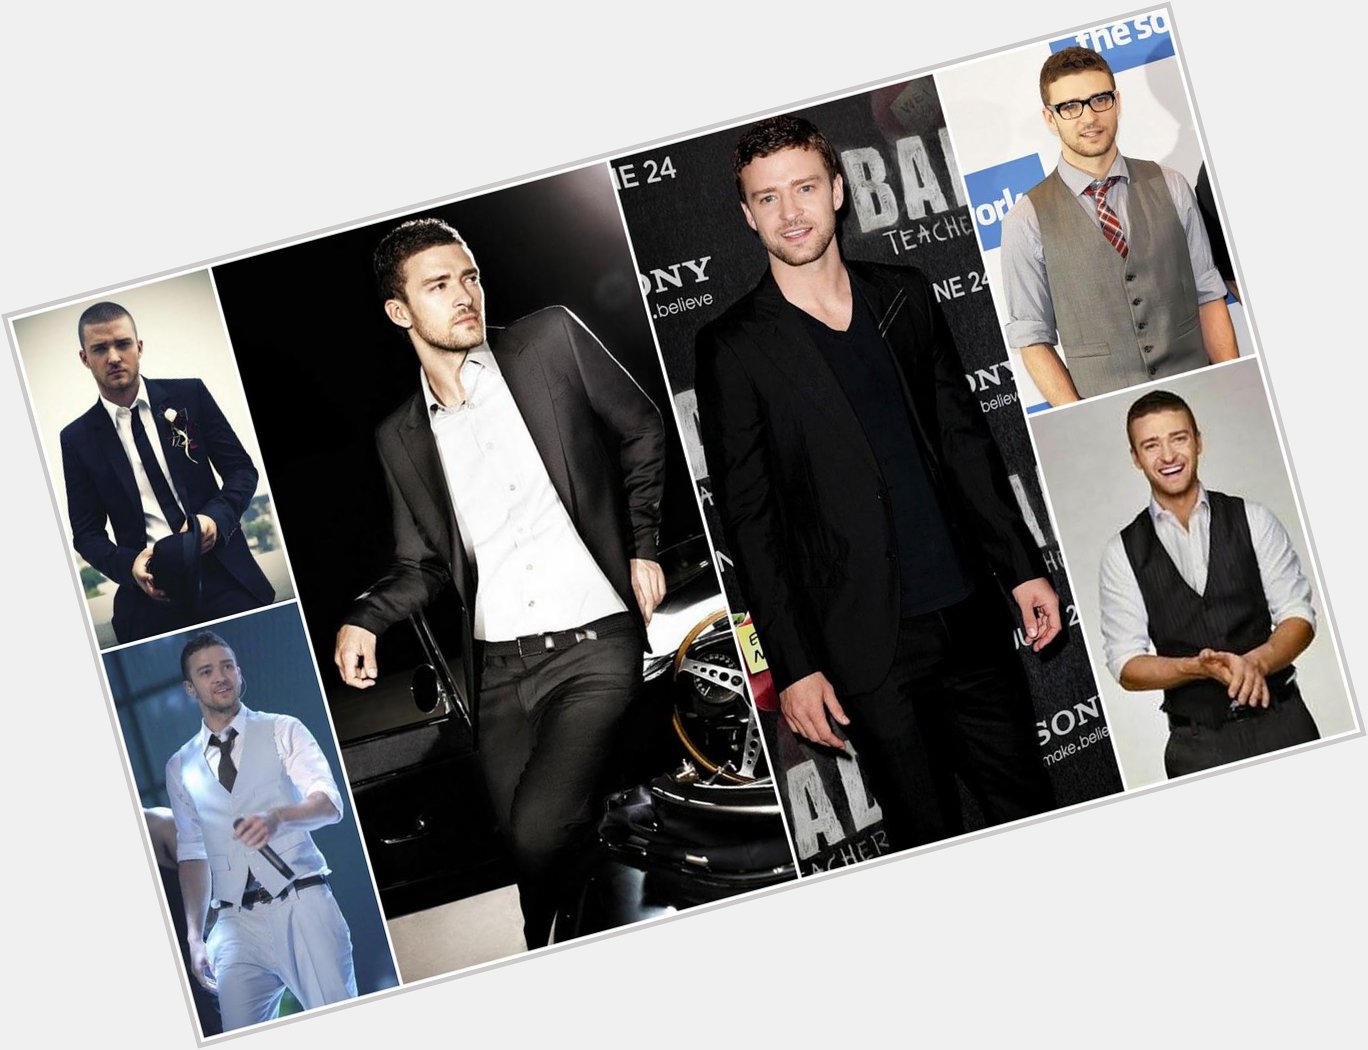 Happy 34th birthday, to one of my favorite Pop singer Justin Timberlake! Have a great day & Bday!!   